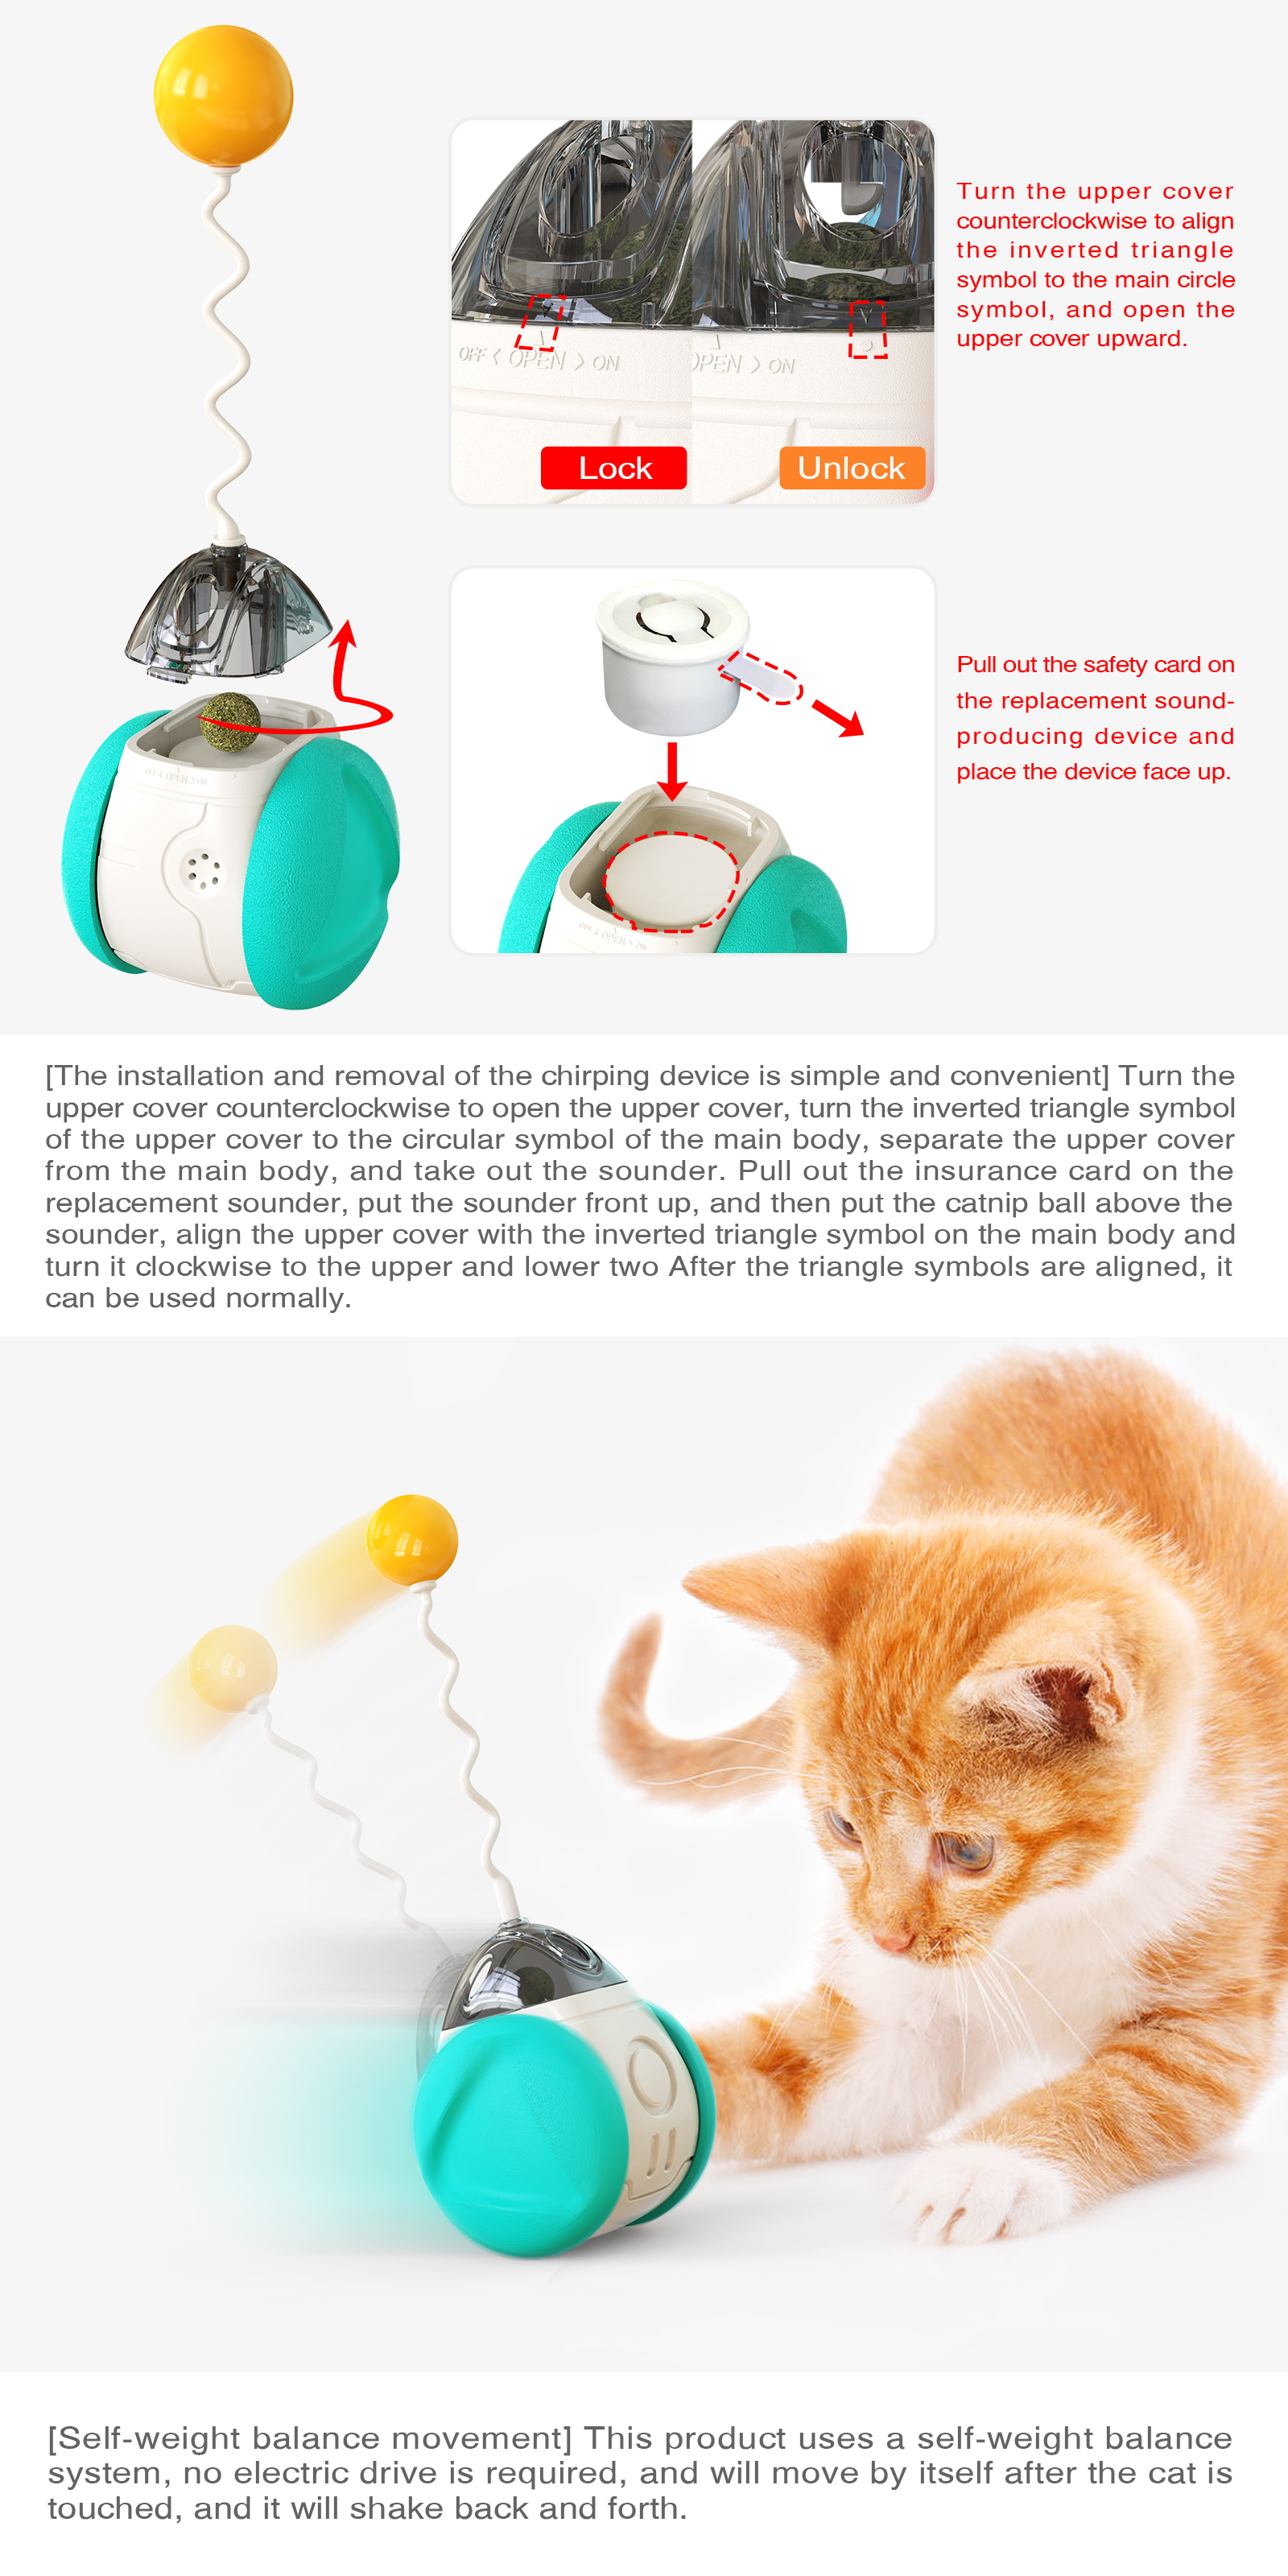 Pet Supplies Factory Wholesale Company New Explosive Amazon Sound Tumbler Cat Toy Ball Funny Cat Stick